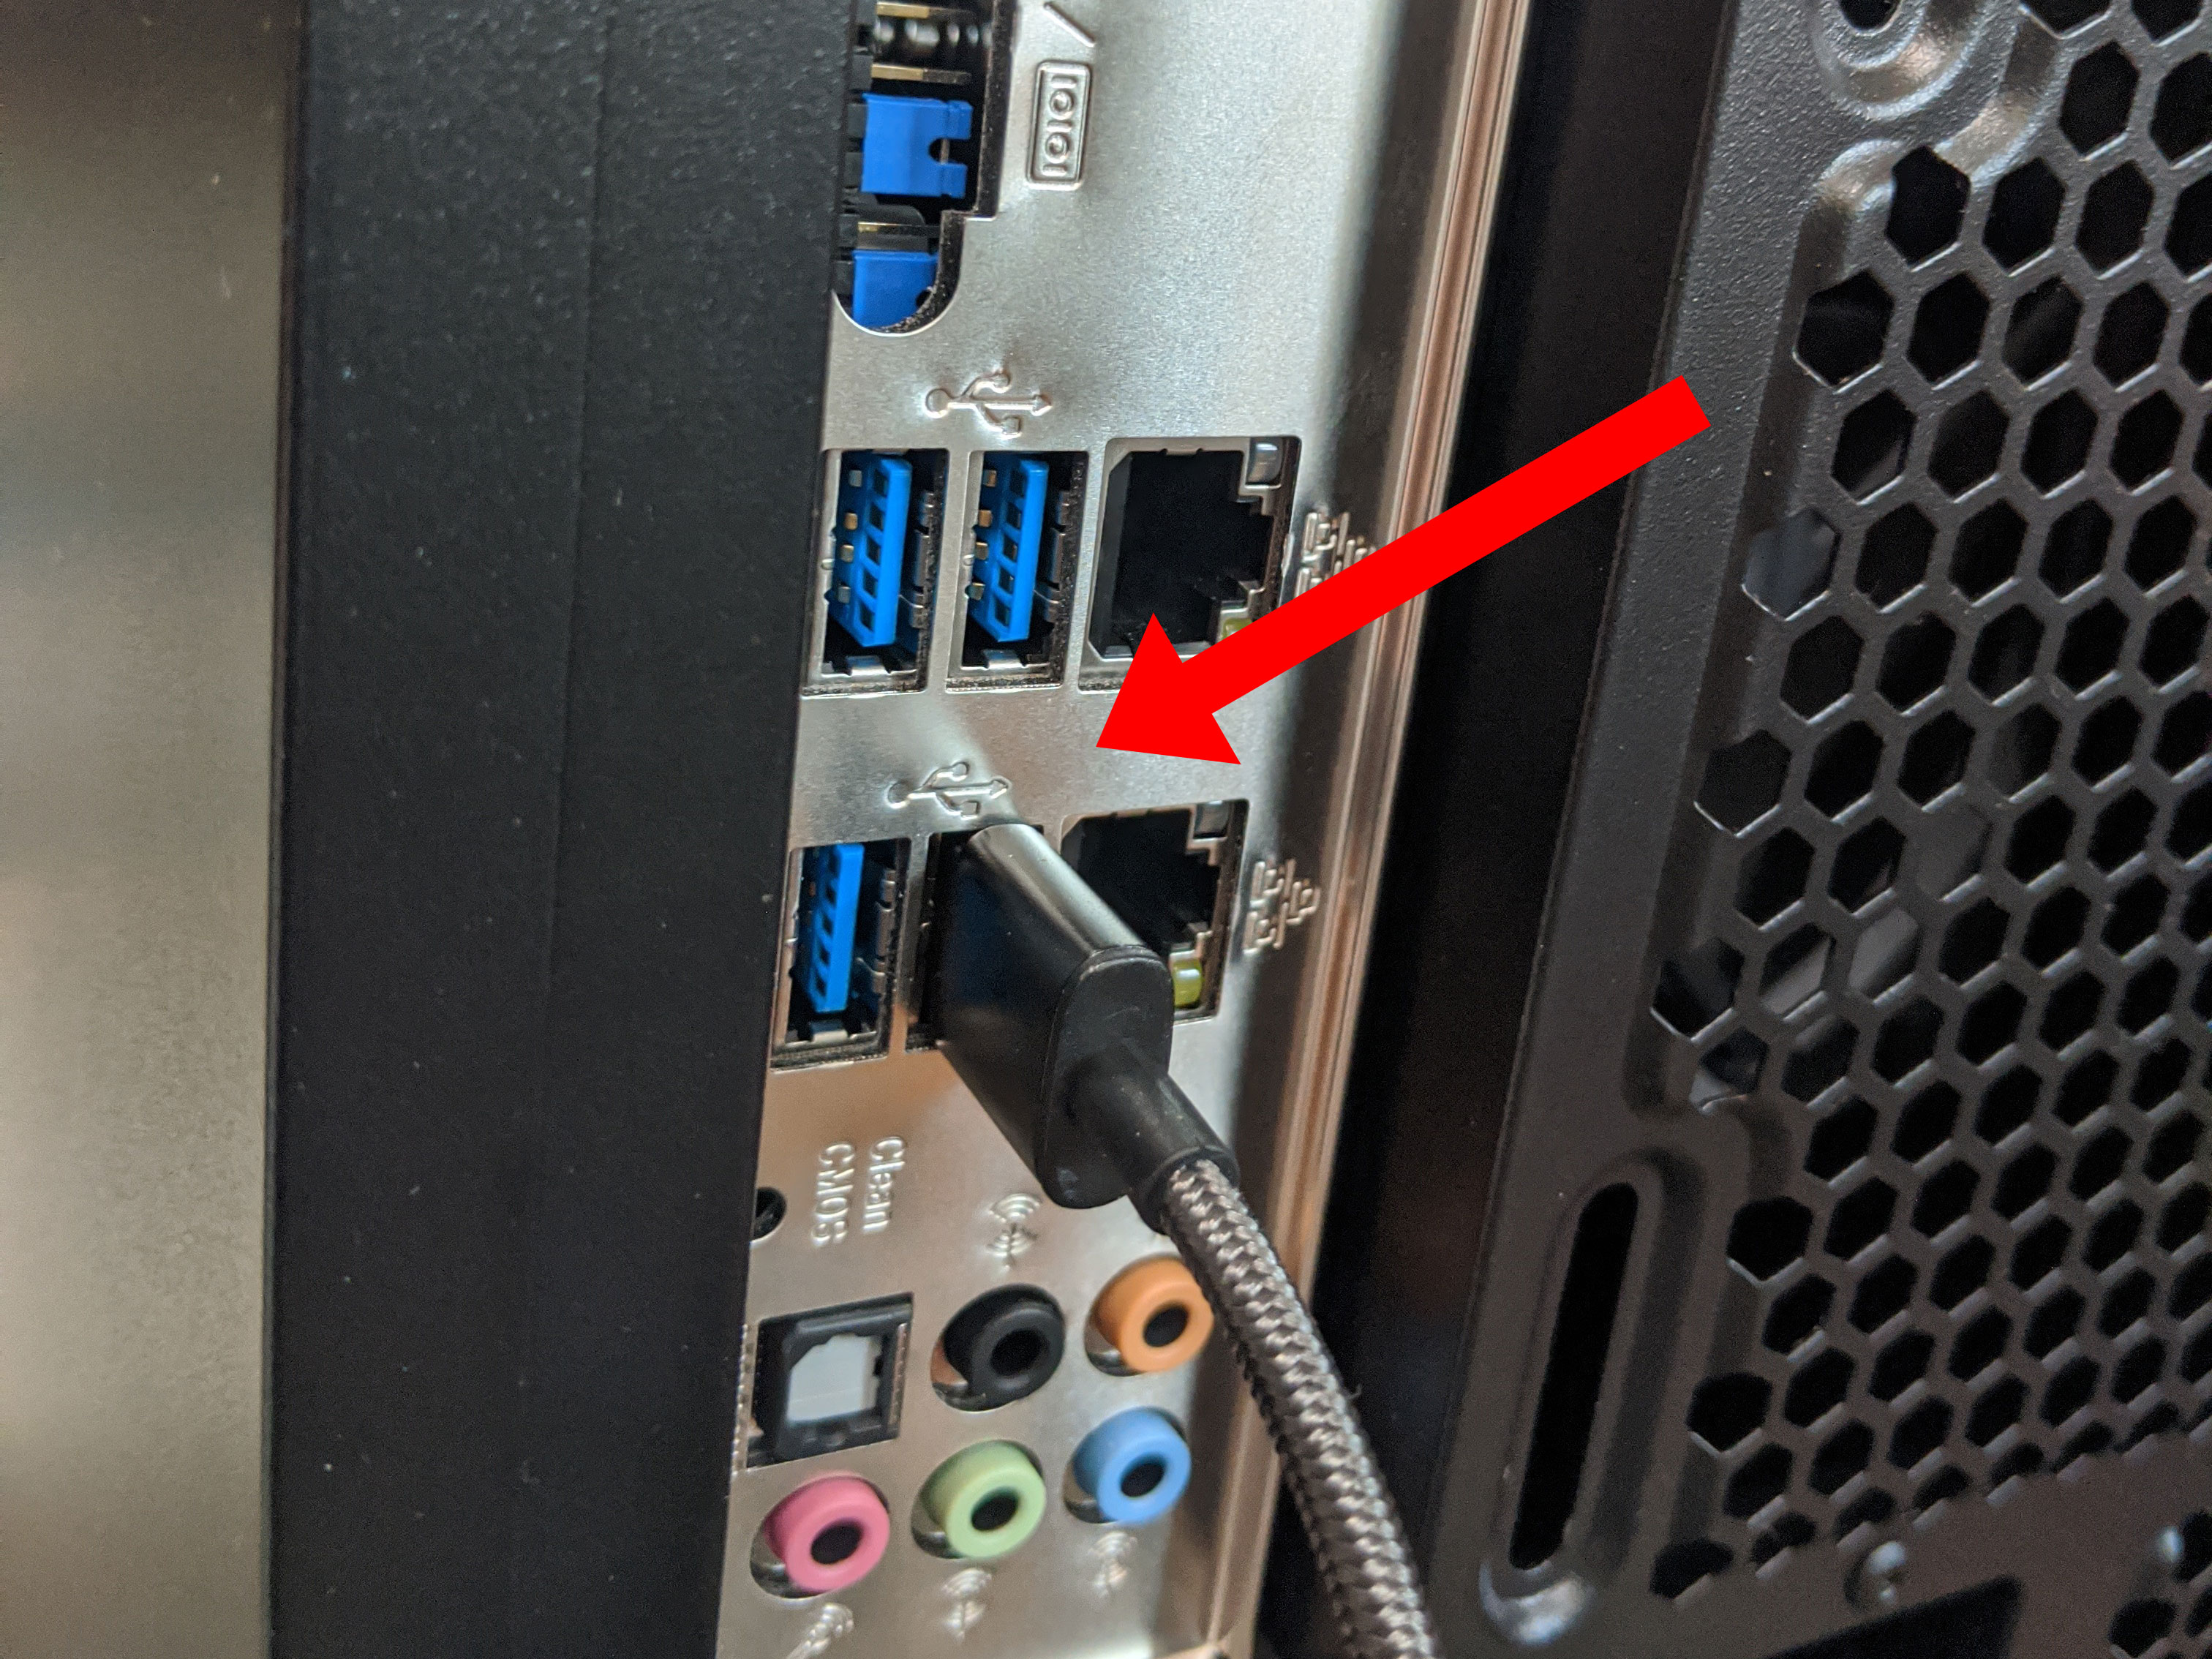 USB connection to target computer